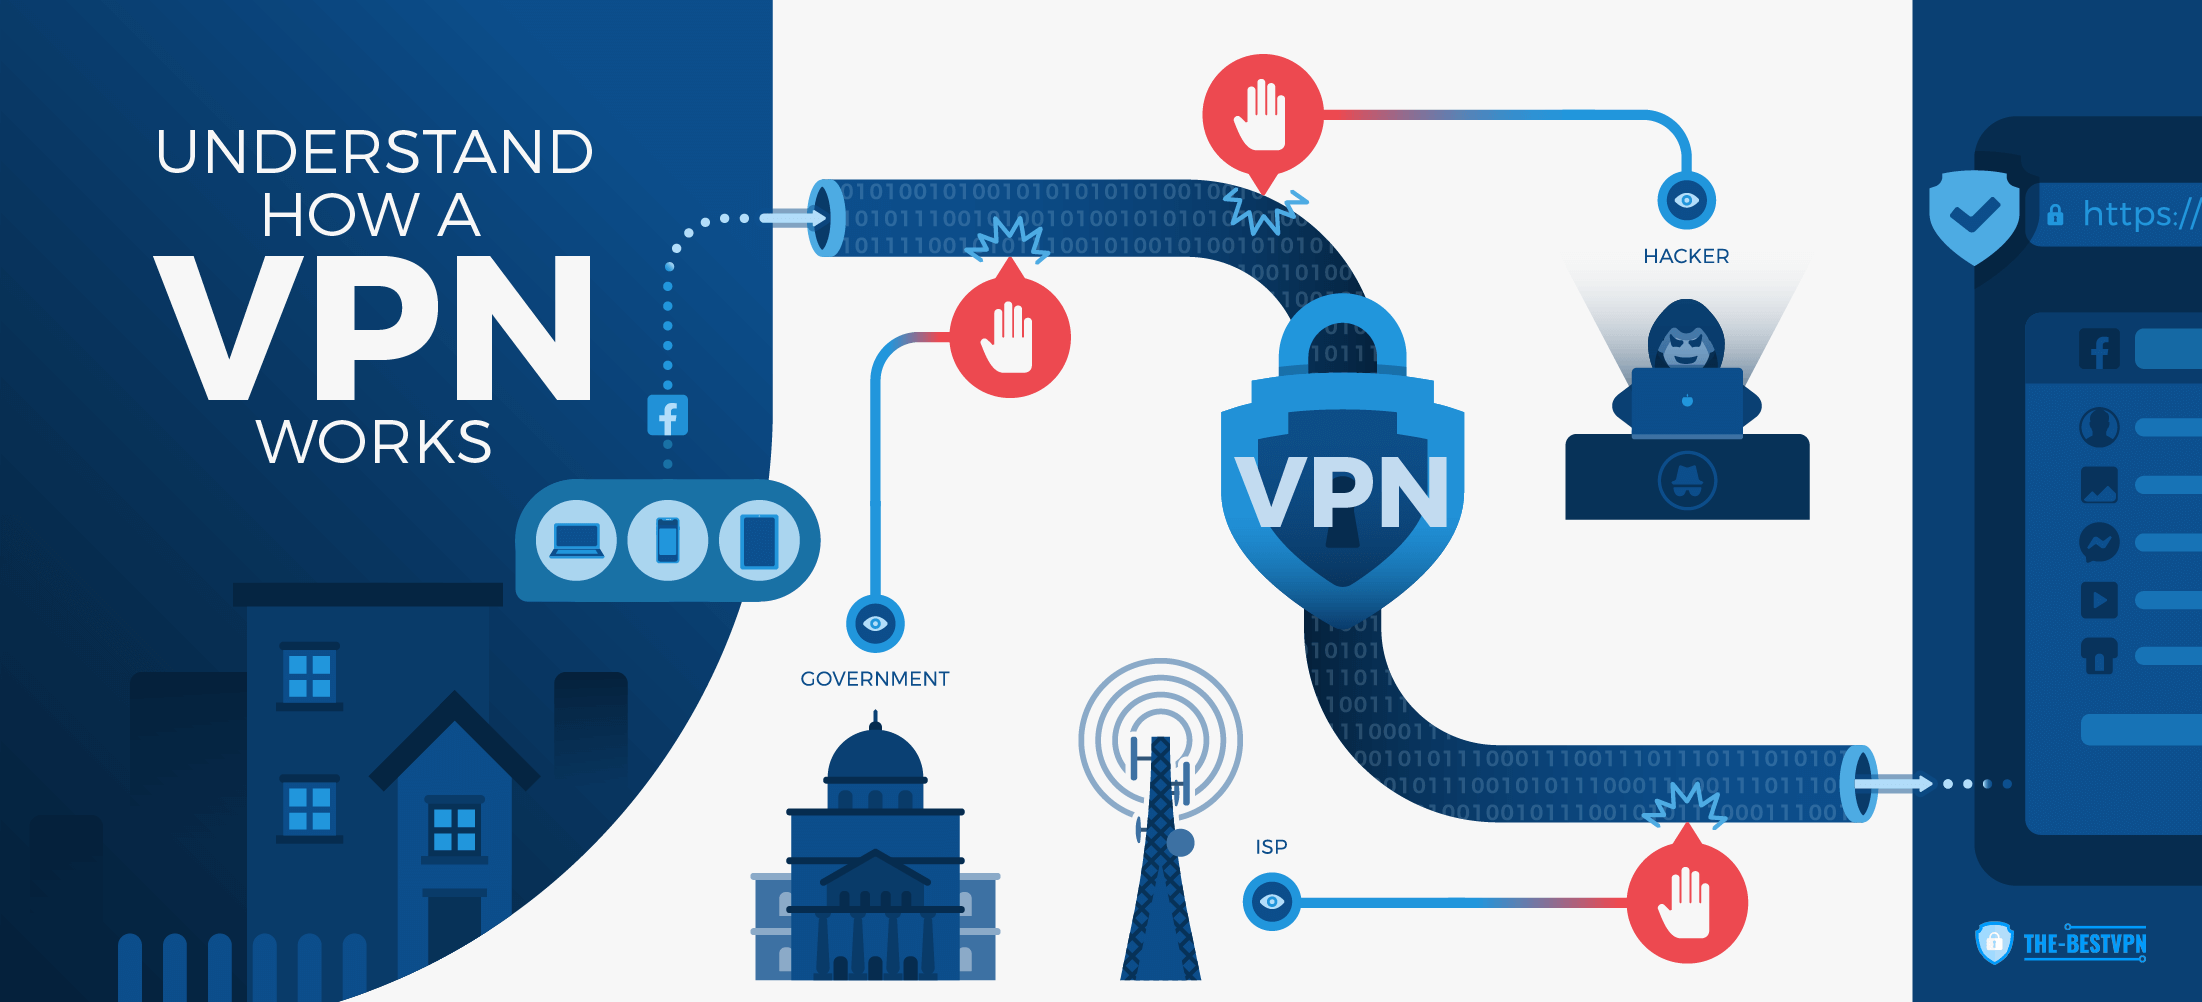 Here’s How You Can Use a VPN to Torrent Safely